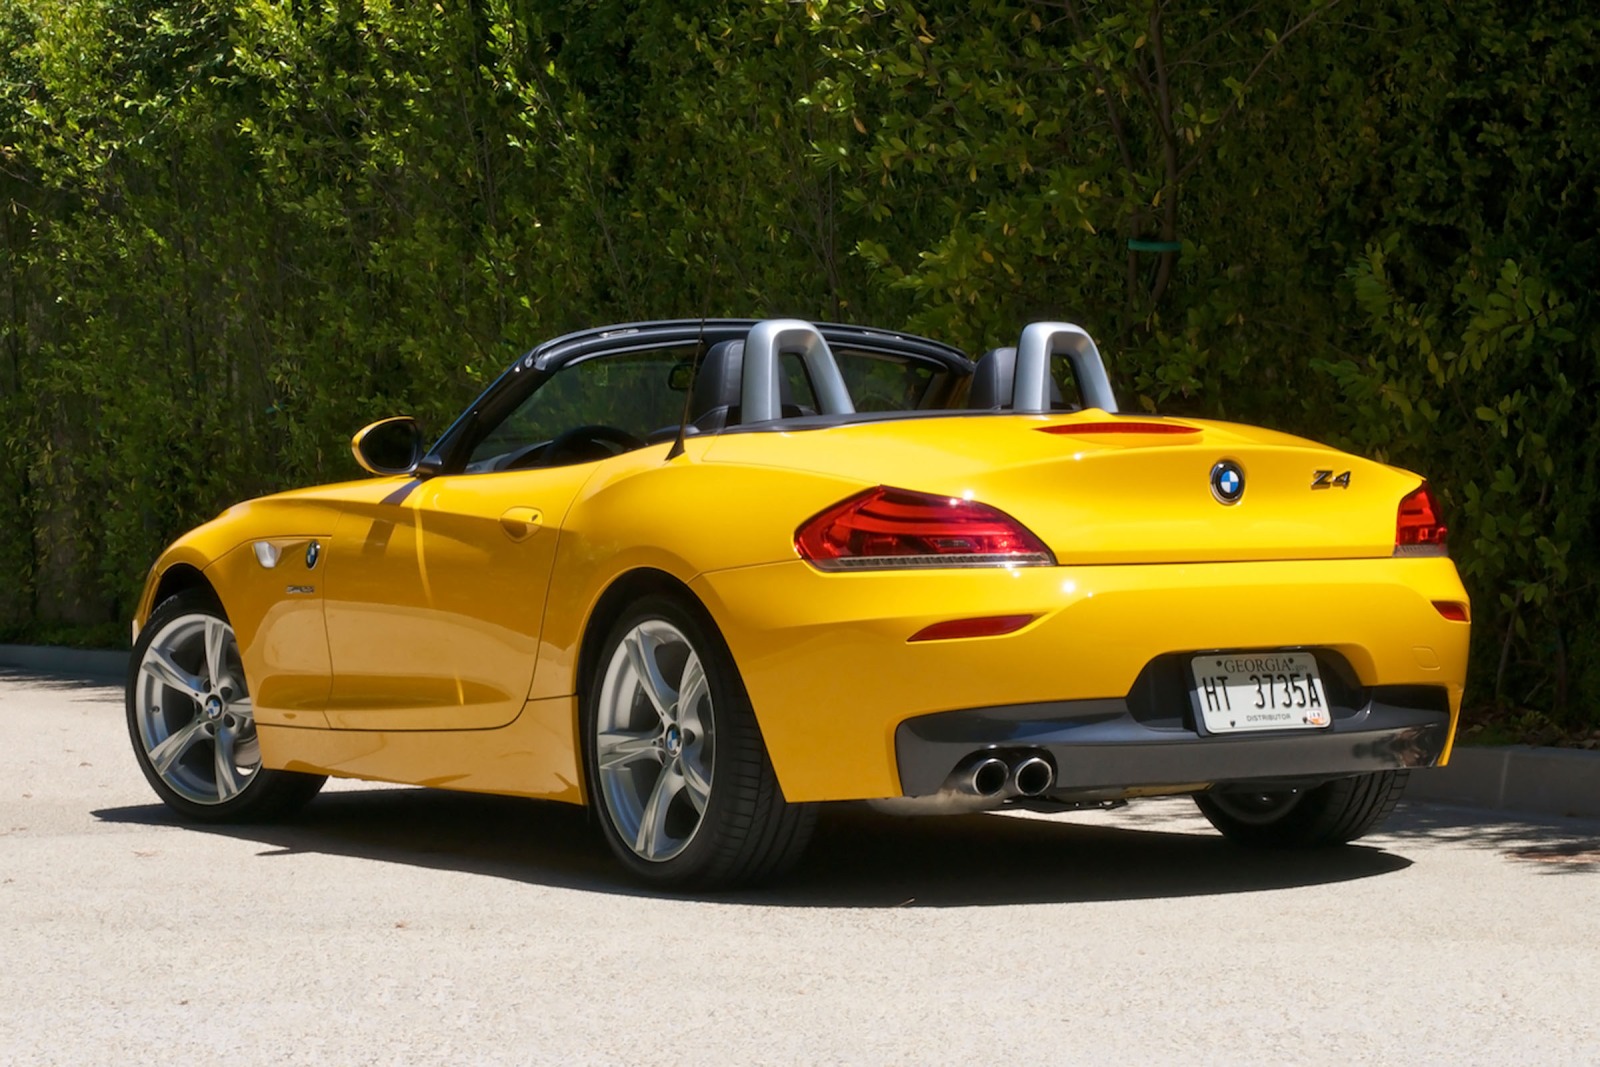 2012 BMW Z4 sDrive28i VIN Number Search - AutoDetective